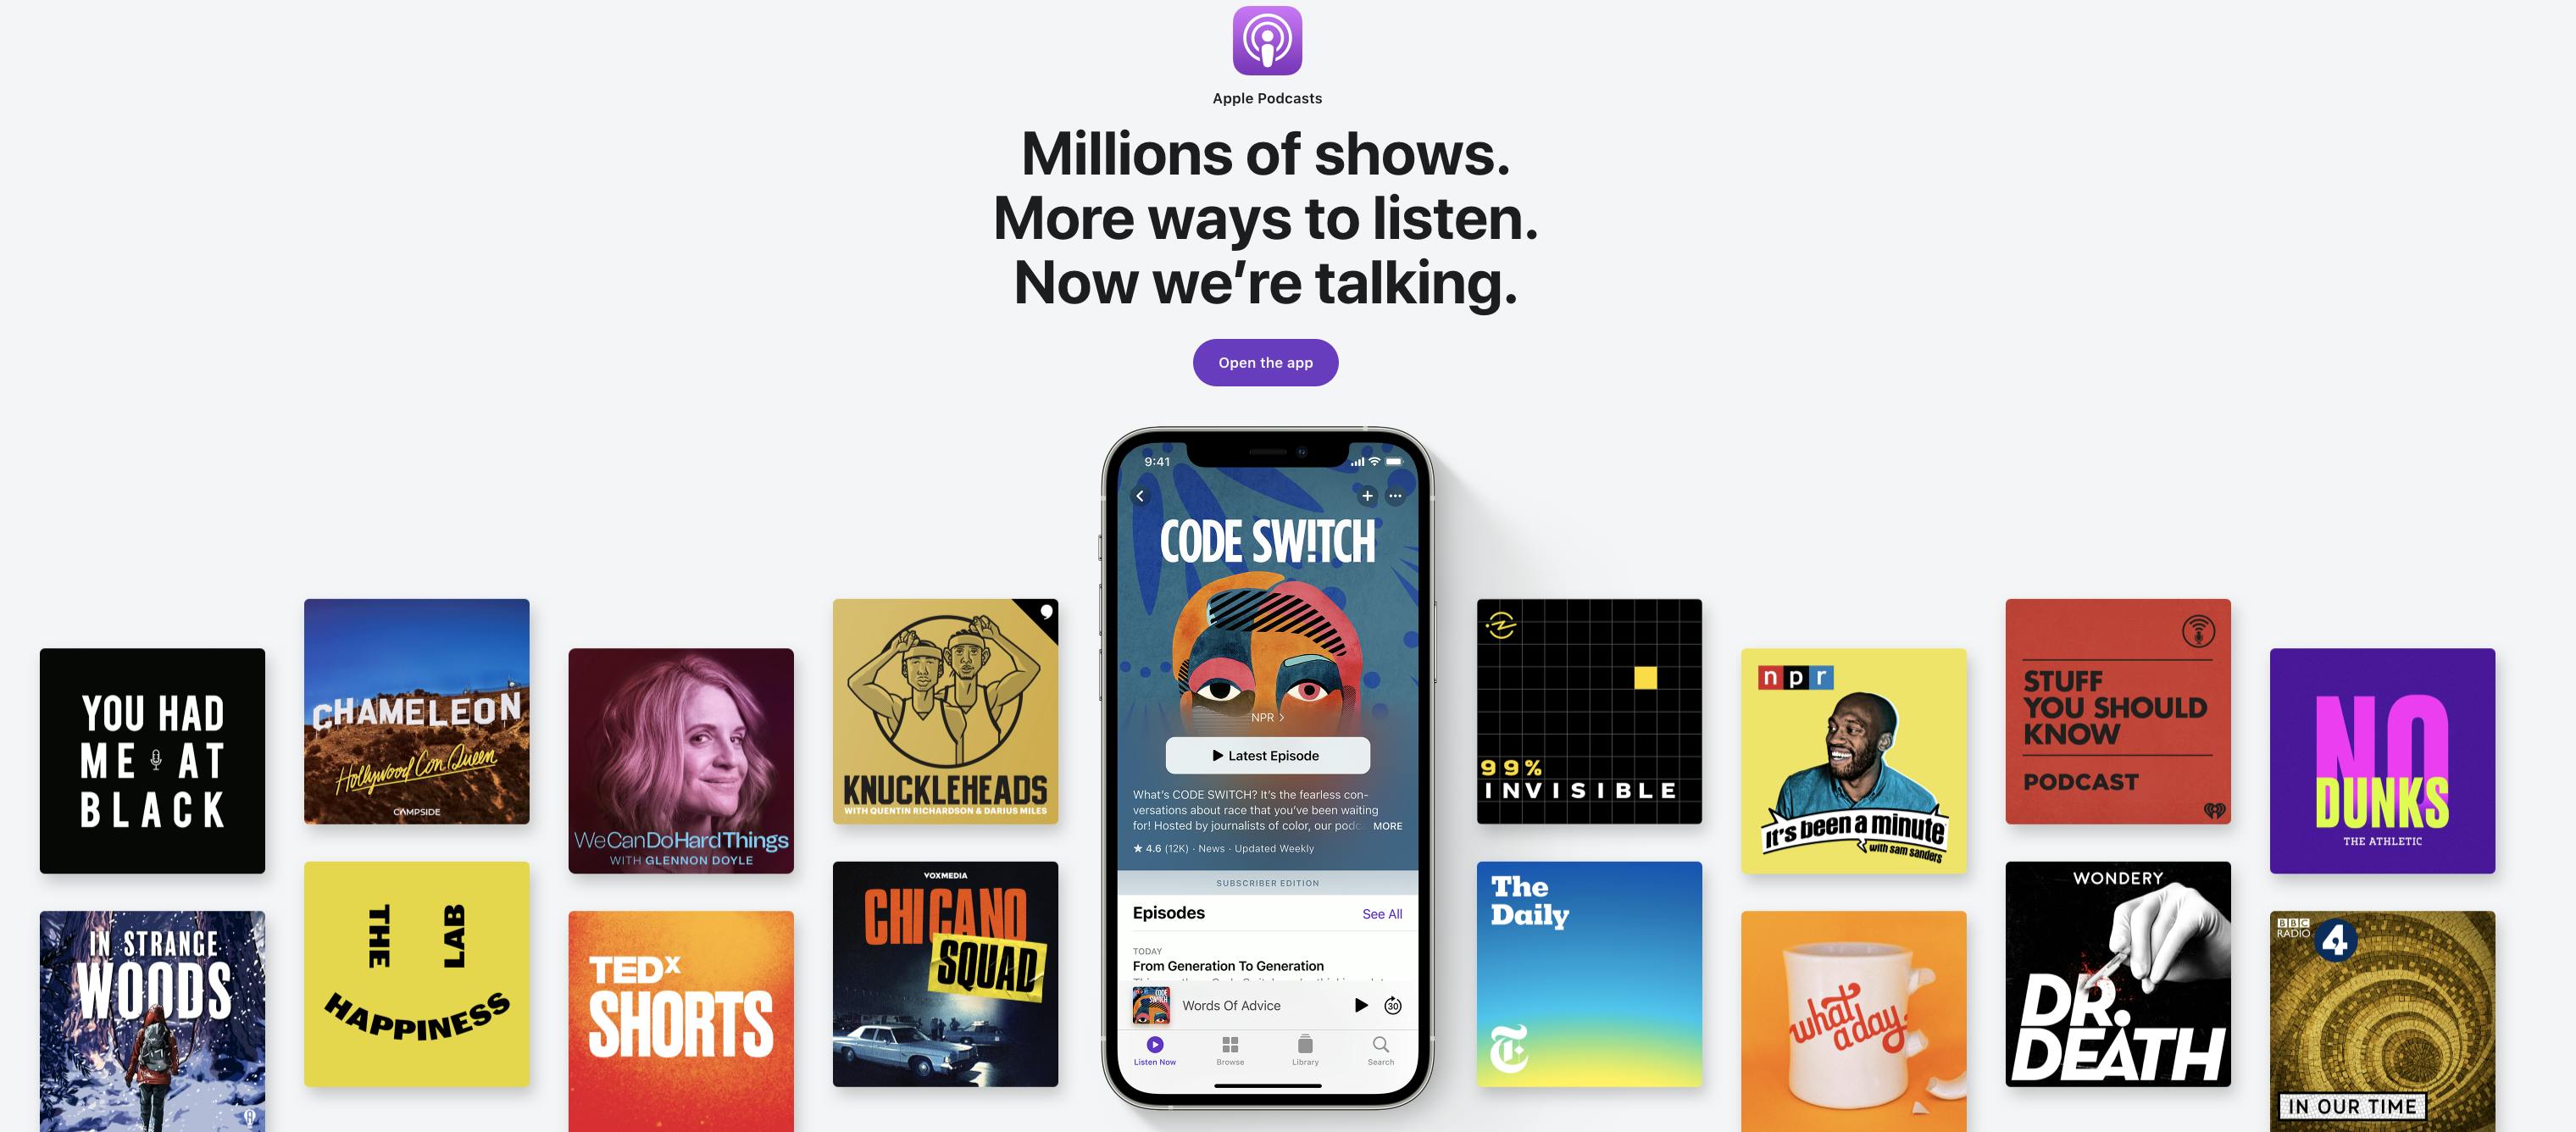 Half Size Me on Apple Podcasts